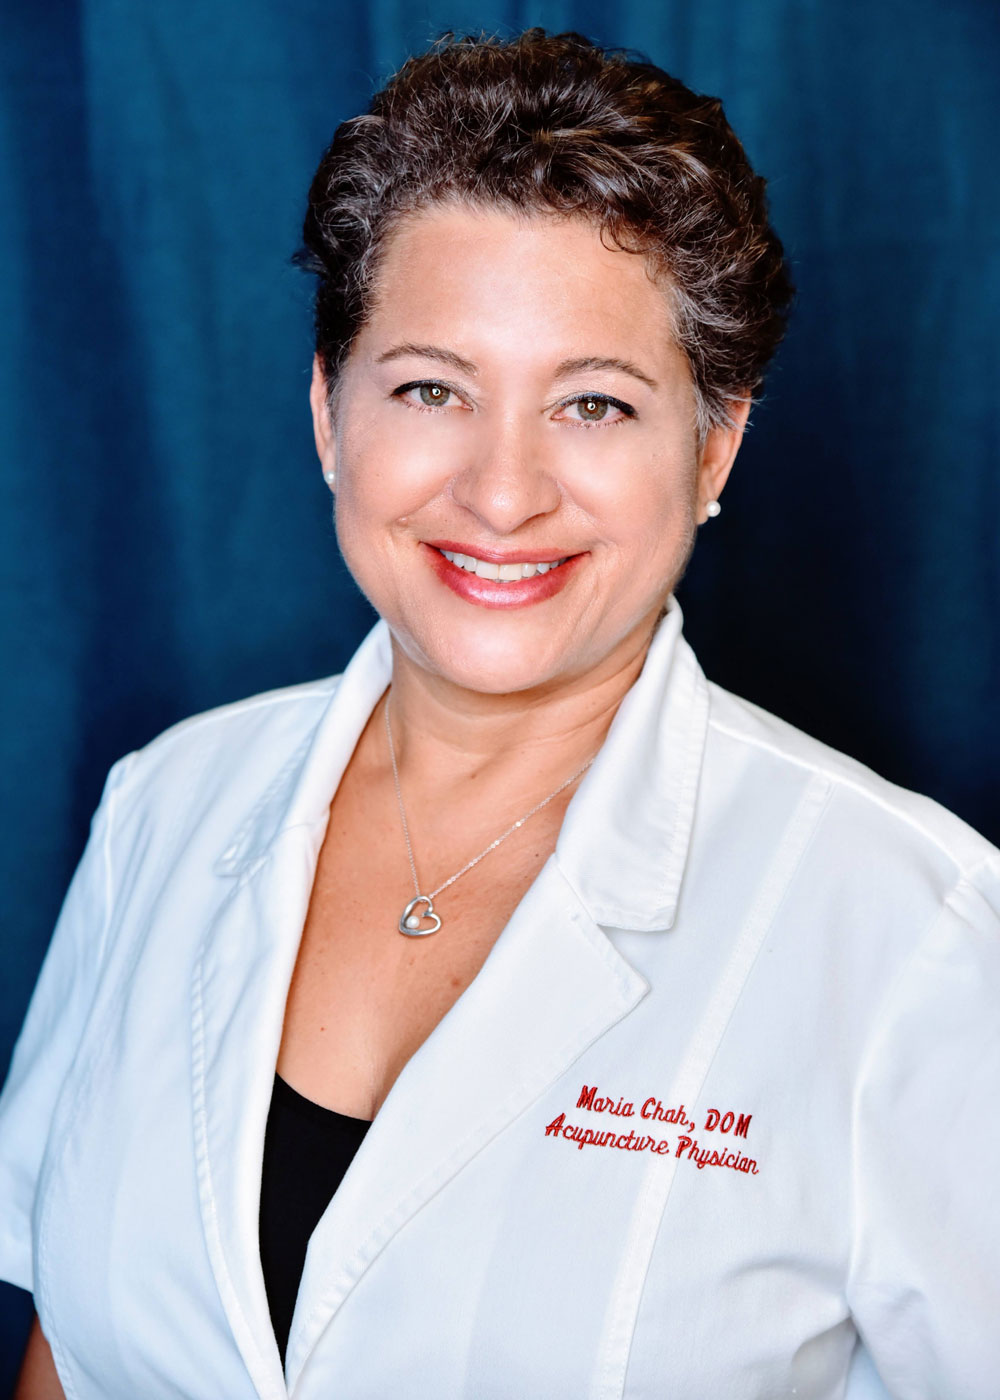 Maria Chah, Acupuncturist Physician, Doctor of Oriental Medicine